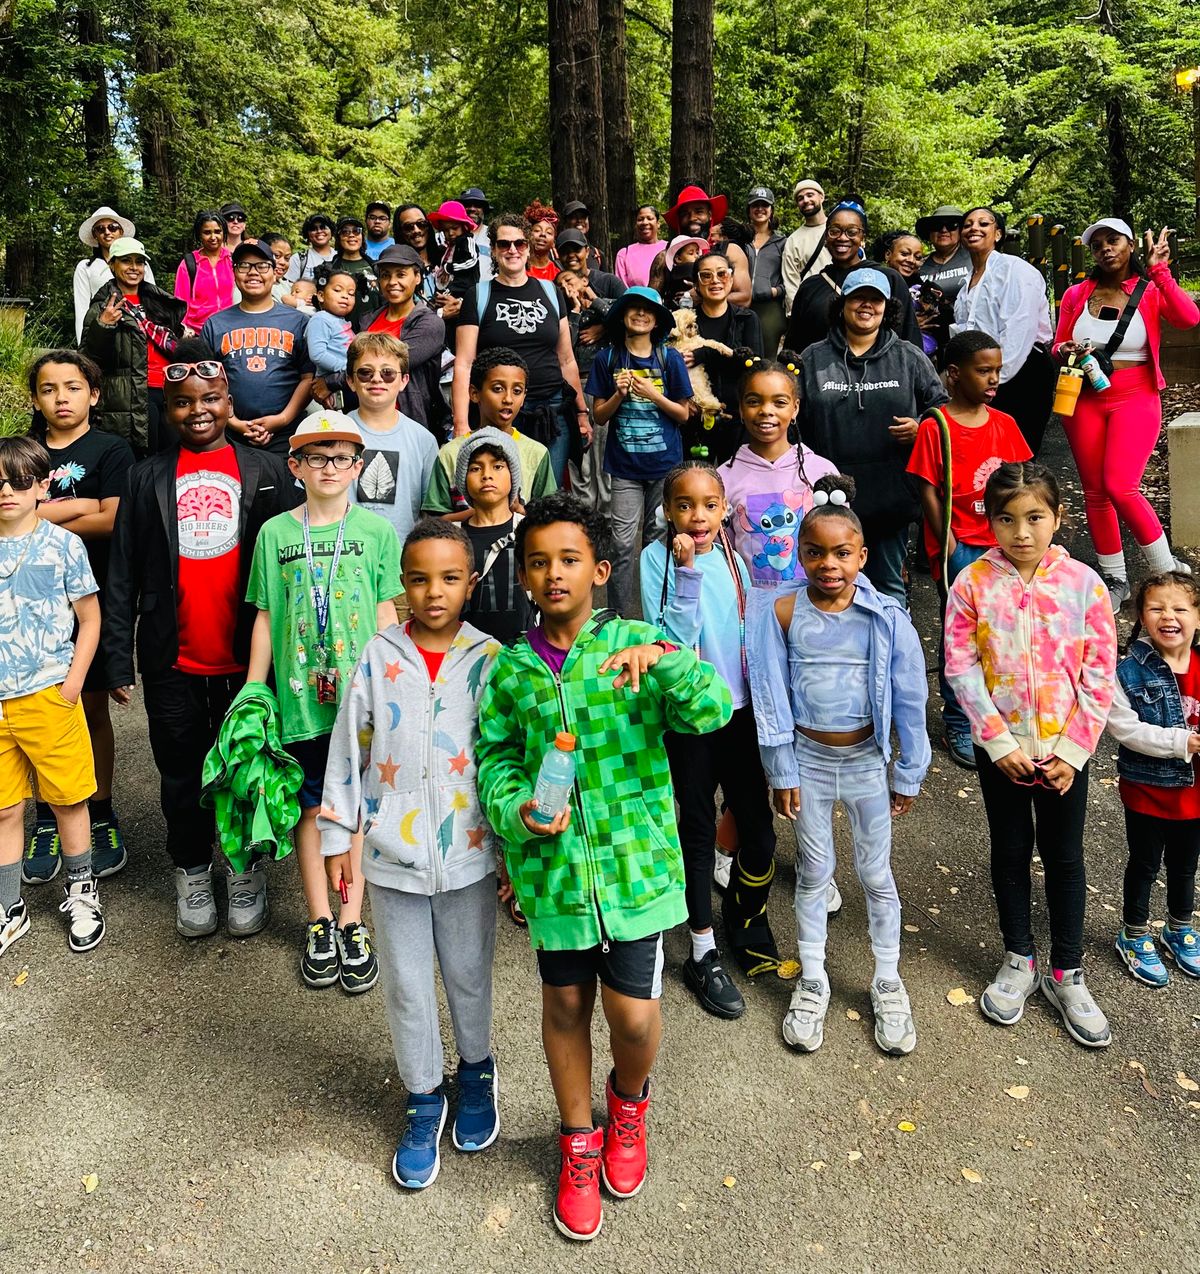 Kids Hike\/playdate 5 at one of the BEST hidden gem parks of the Bay Area!!! 